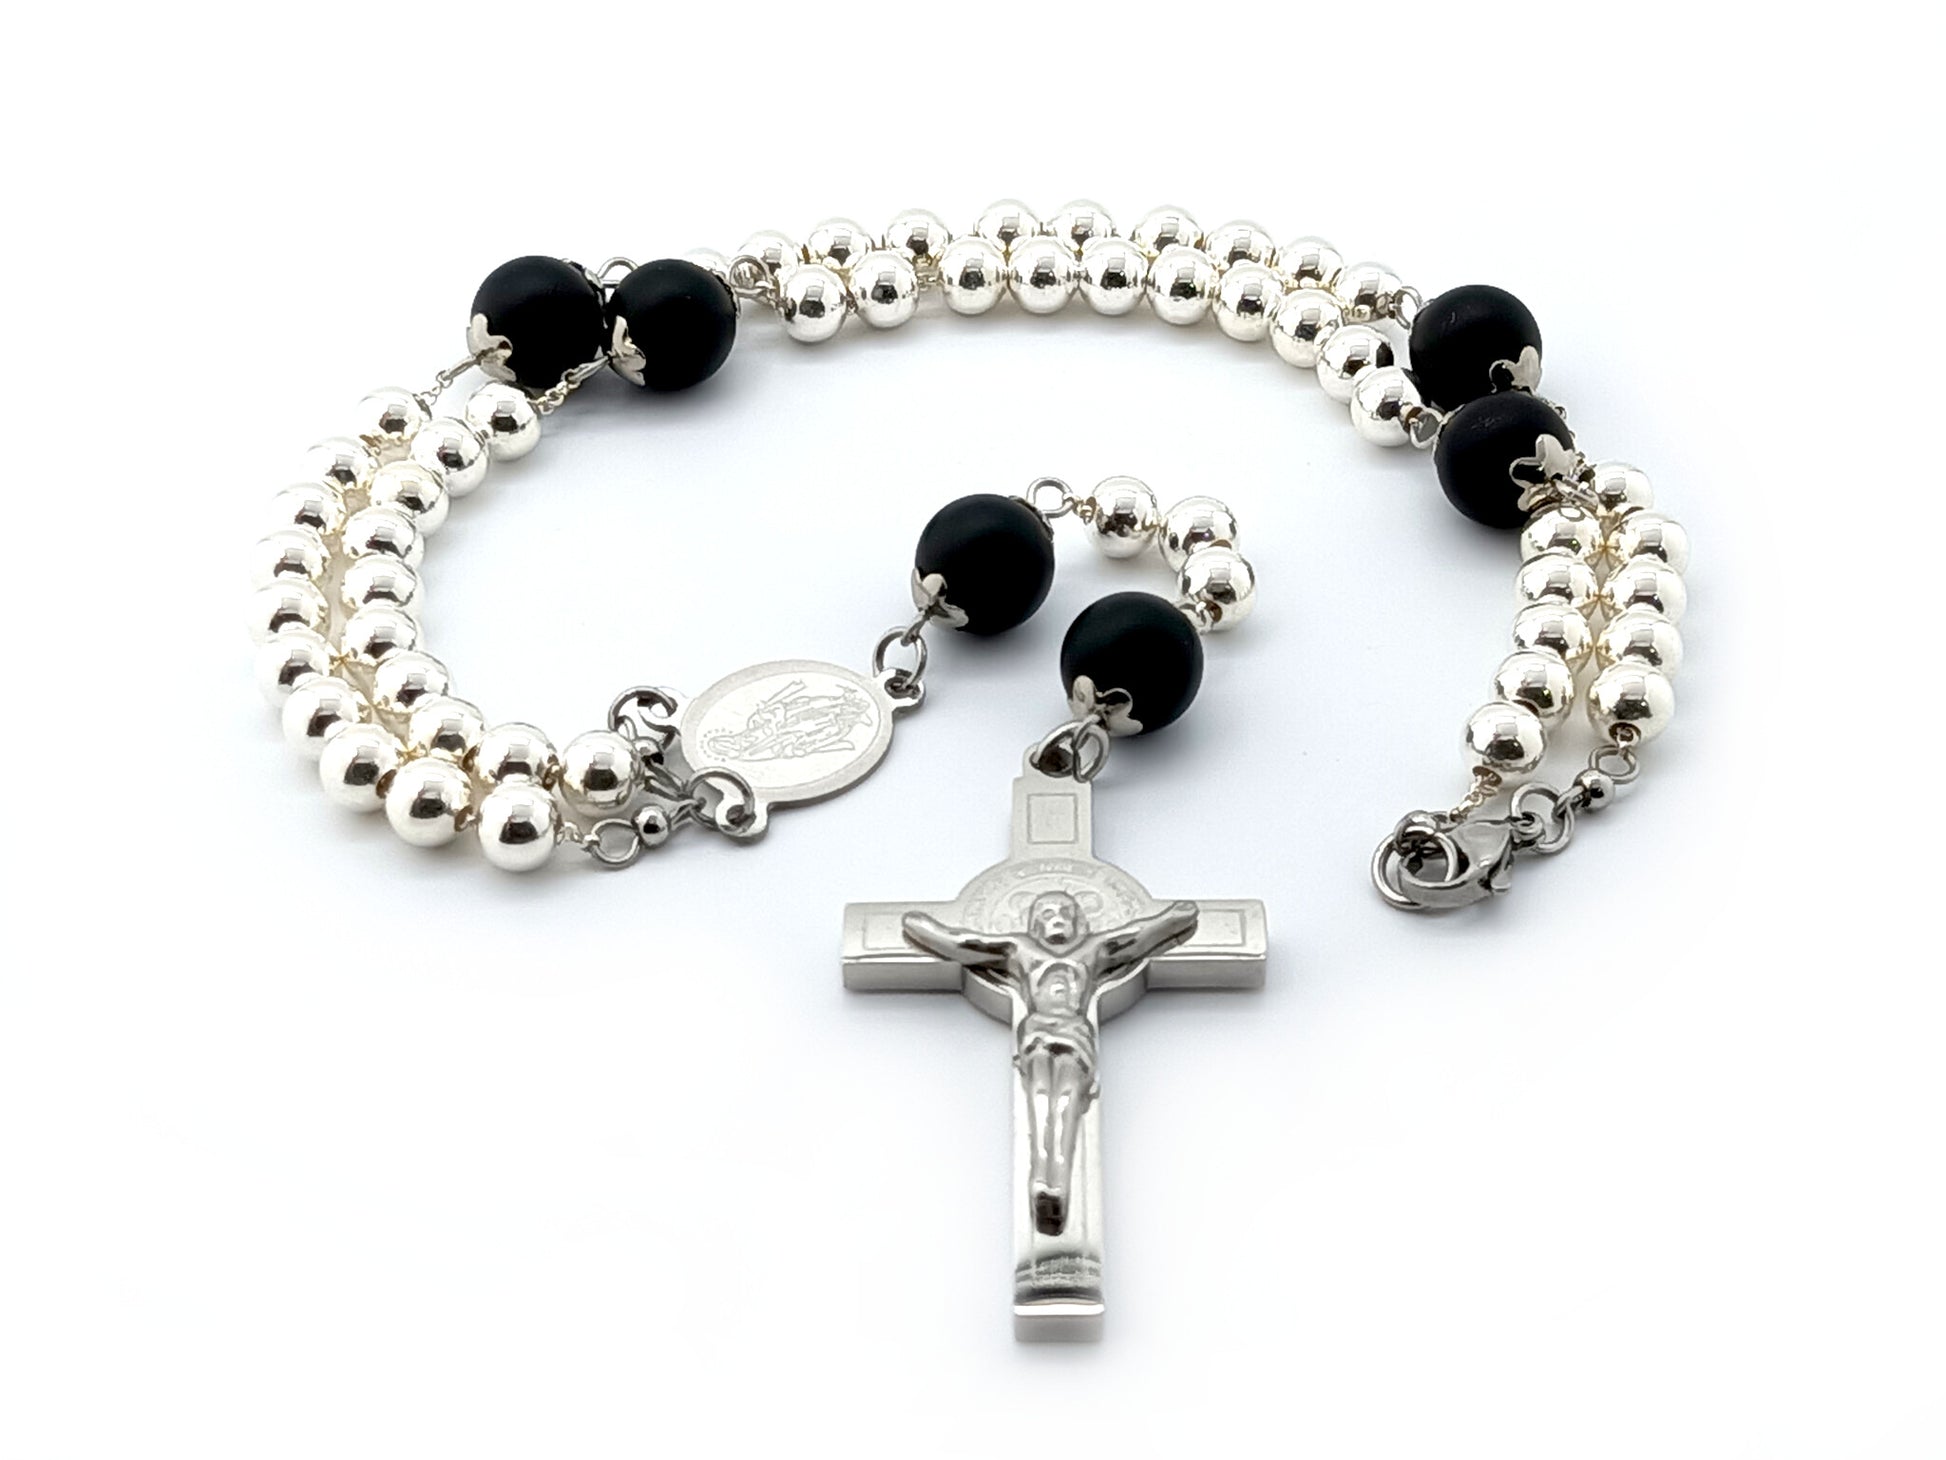 Our Lady of Grace unique rosary beads 925 sterling silver rosary necklace with matt onyx and 925 silver beads stainless steel Saint Benedict crucifix, etched medal and lobster clasp.